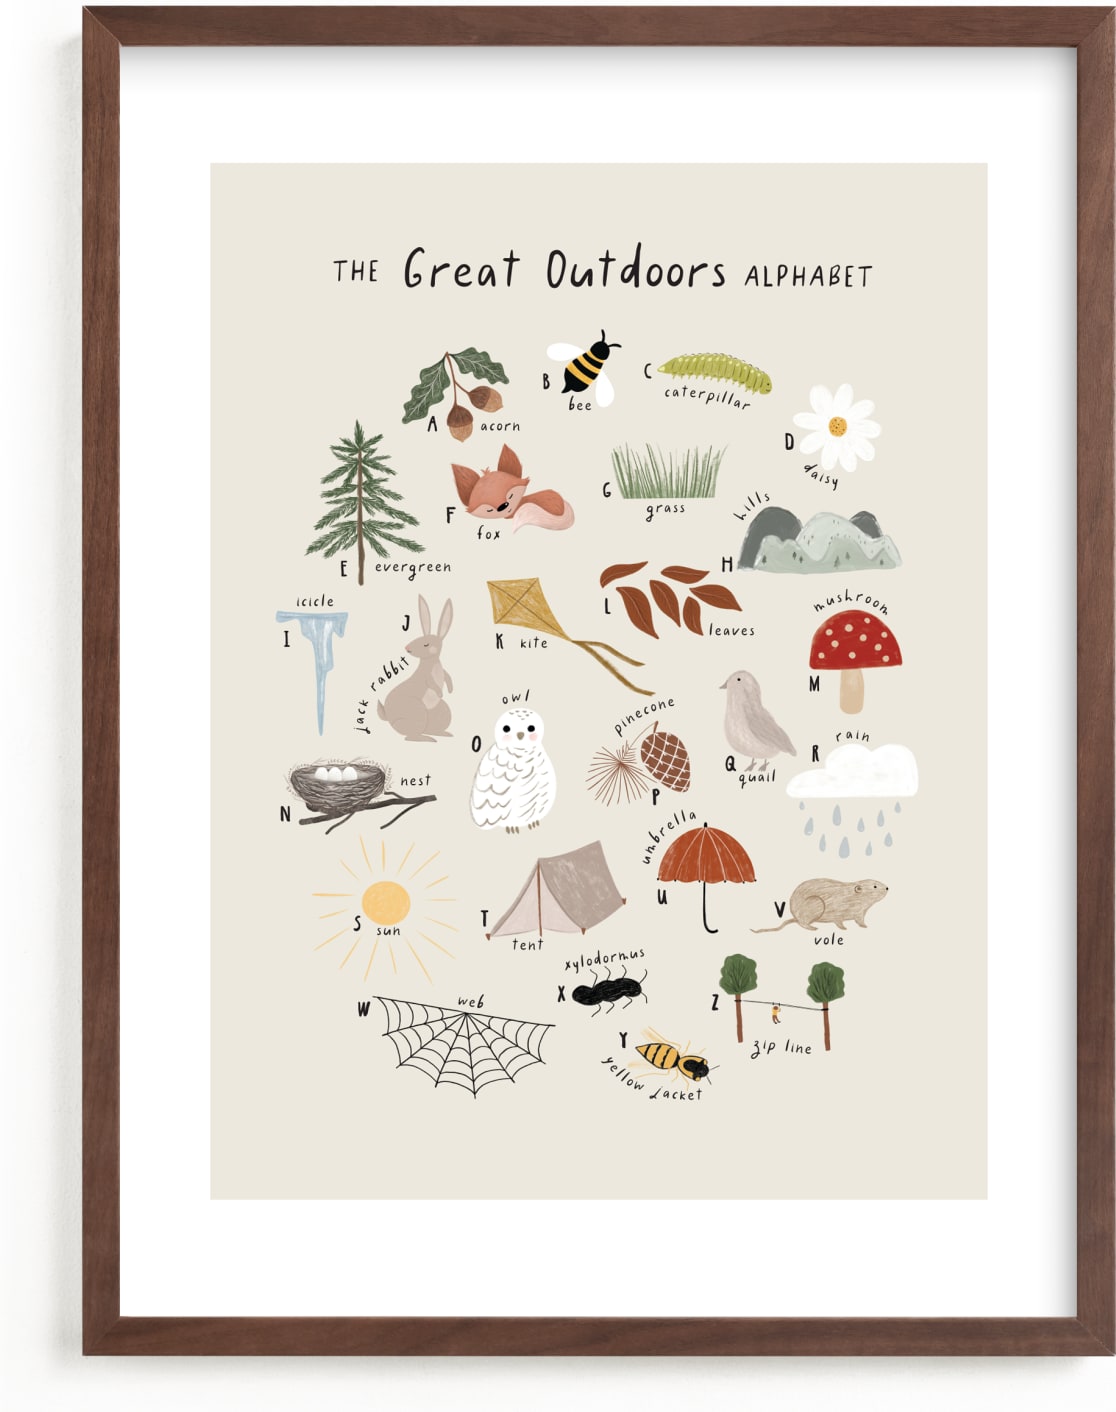 This is a brown art by Maja Cunningham called The great outdoors alphabet.